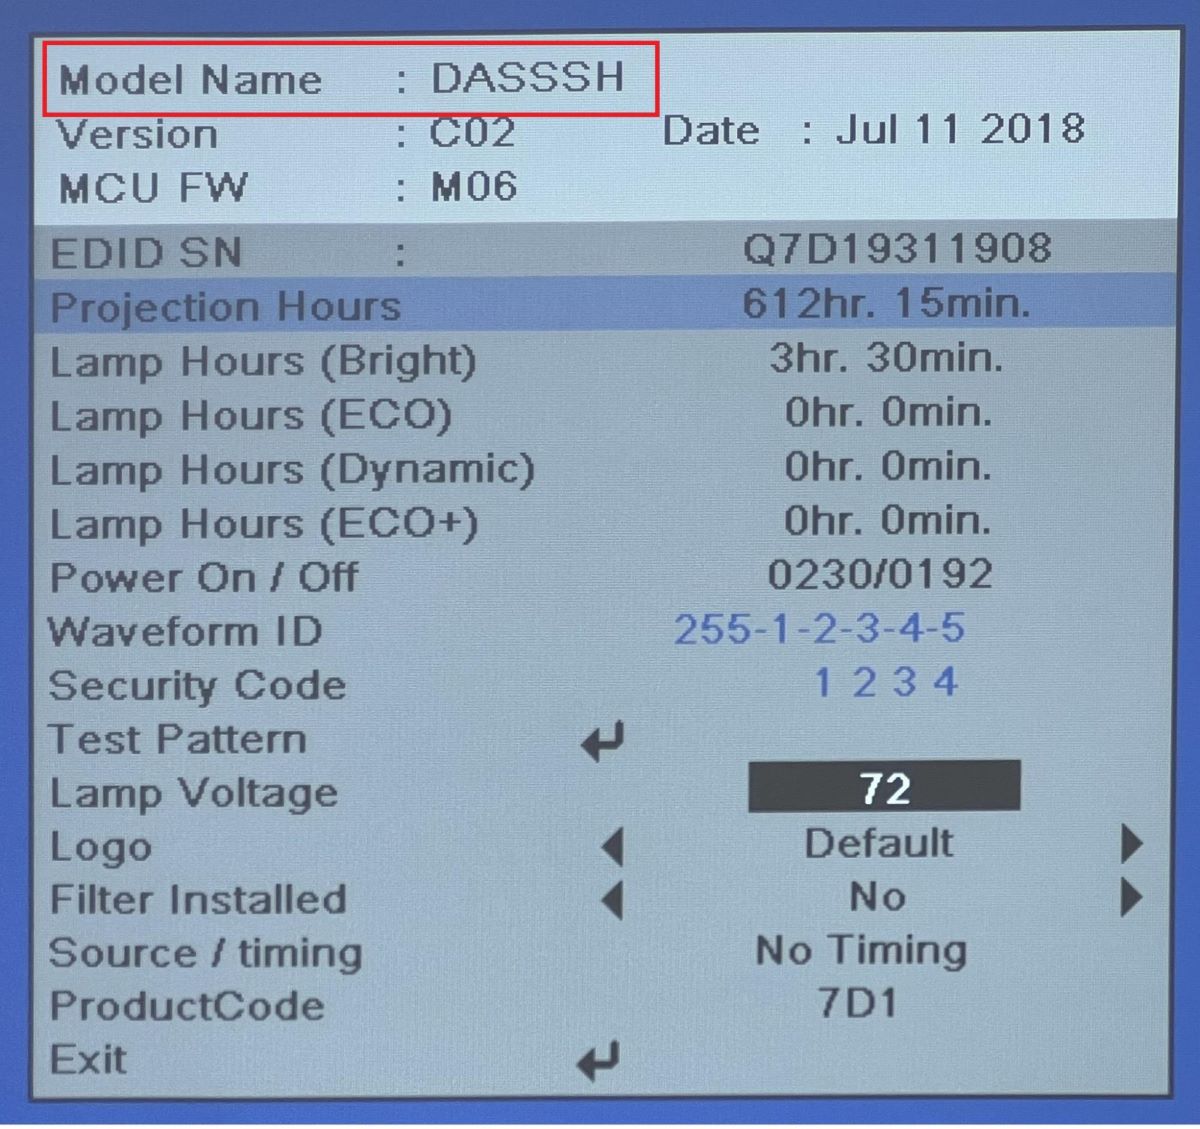 The service menu of the Optoma projector showing the model name is DASSSH